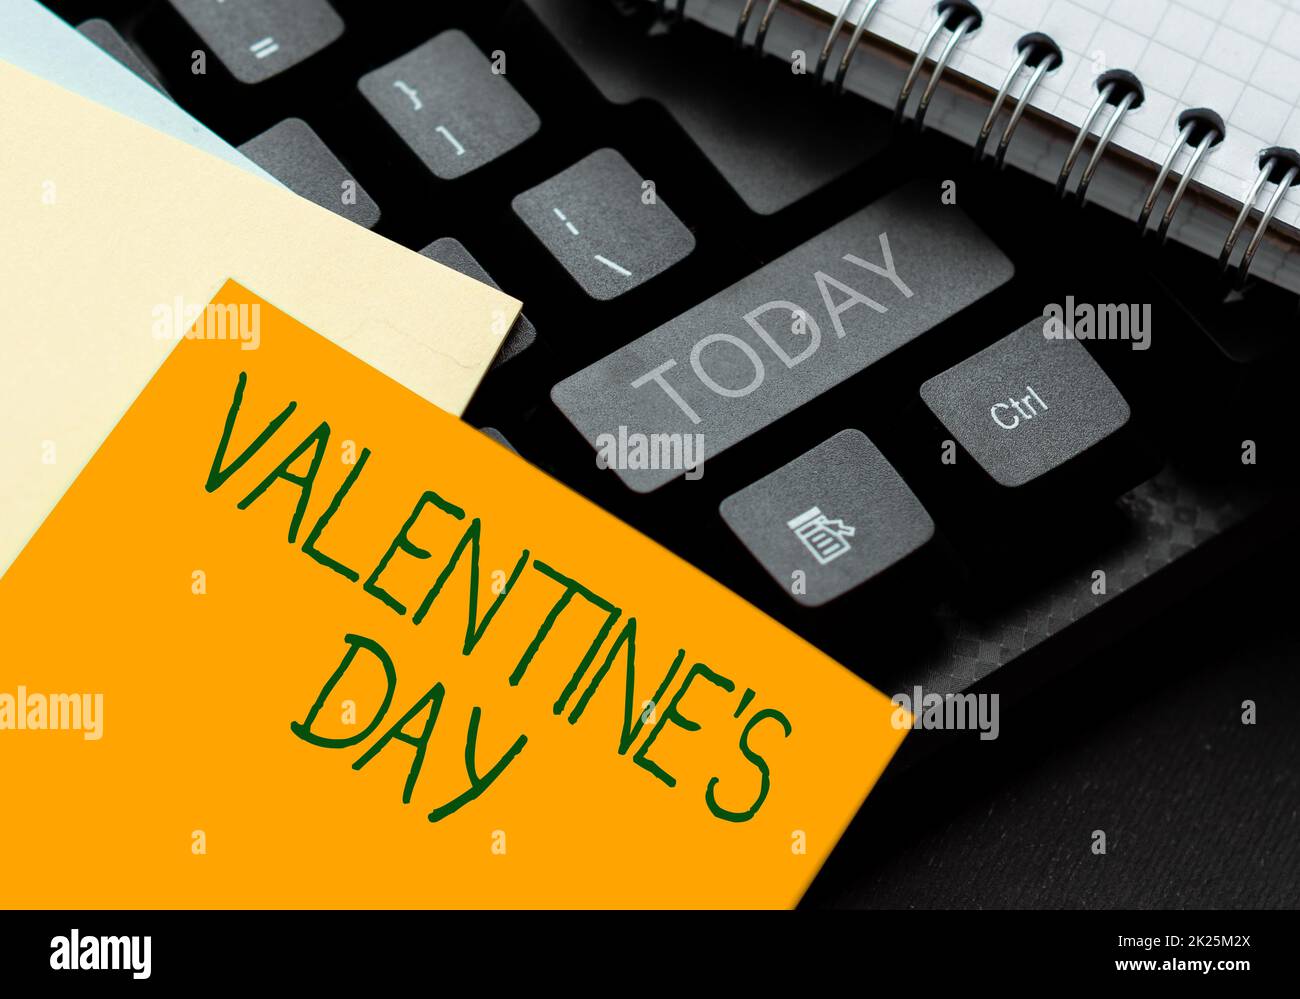 Hand writing sign Valentine S Day. Business approach time when showing show feelings of love and affection Connecting With Online Friends, Making Acquaintances On The Internet Stock Photo